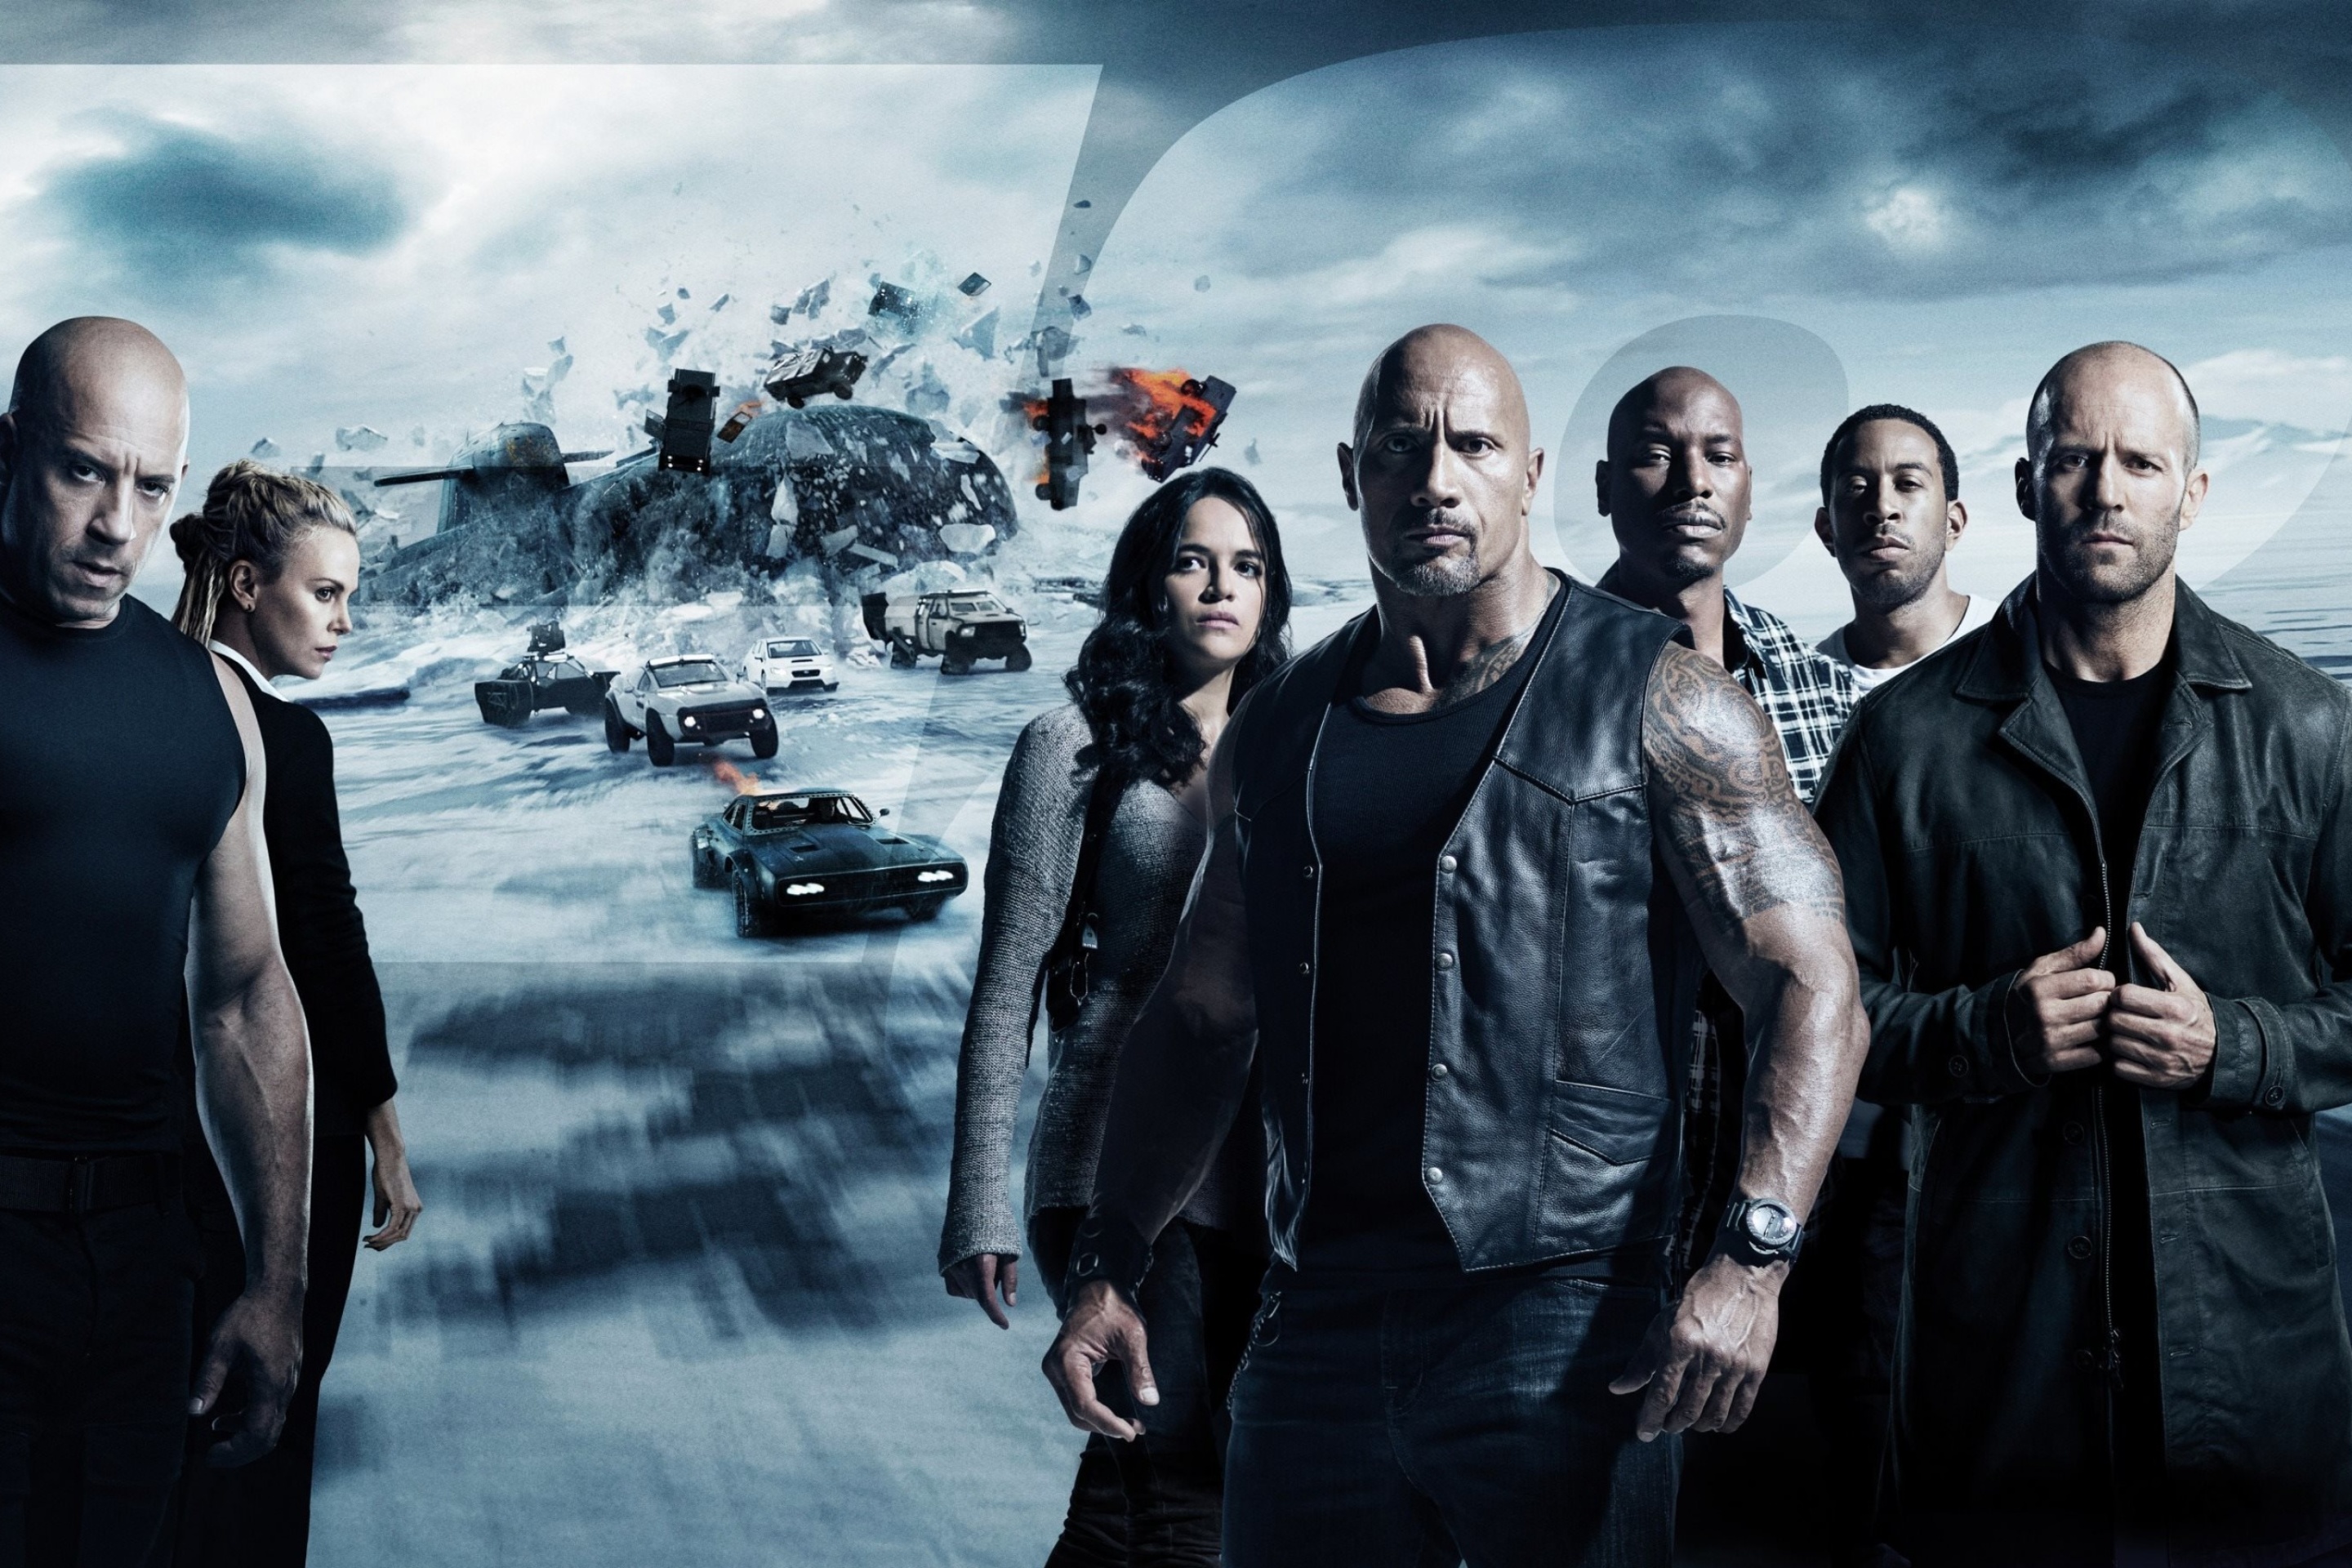 Обои The Fate of the Furious with Vin Diesel, Dwayne Johnson, Charlize Theron 2880x1920